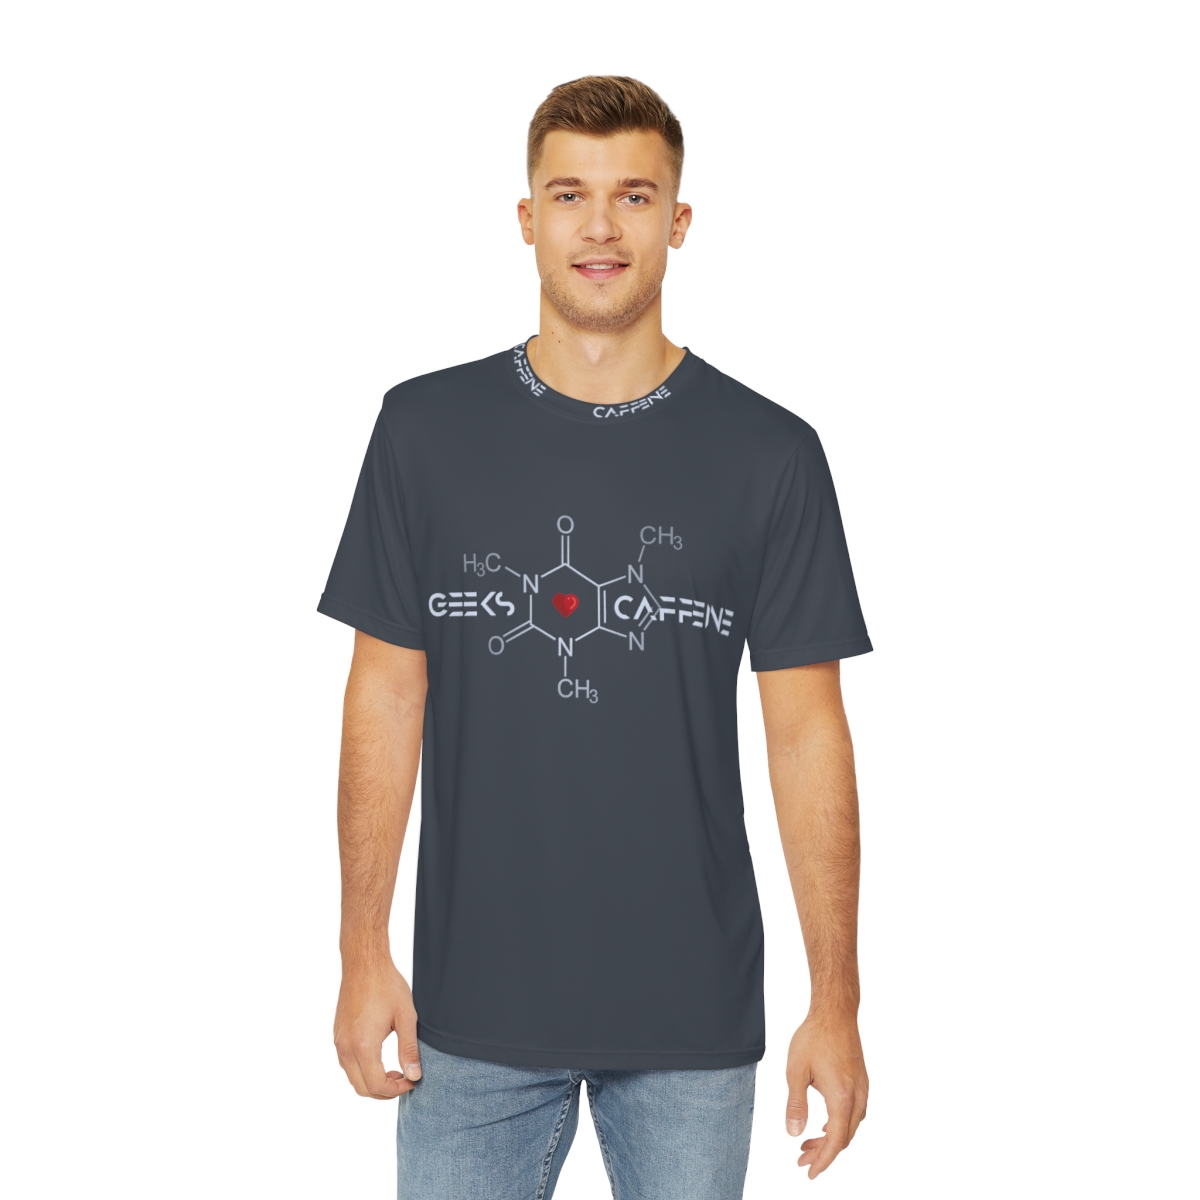 Geeks Love Caffeine T-Shirt - Best Gift for Programmers, Gamers, Chemists, Physicists, Engineers - Geeks Empire